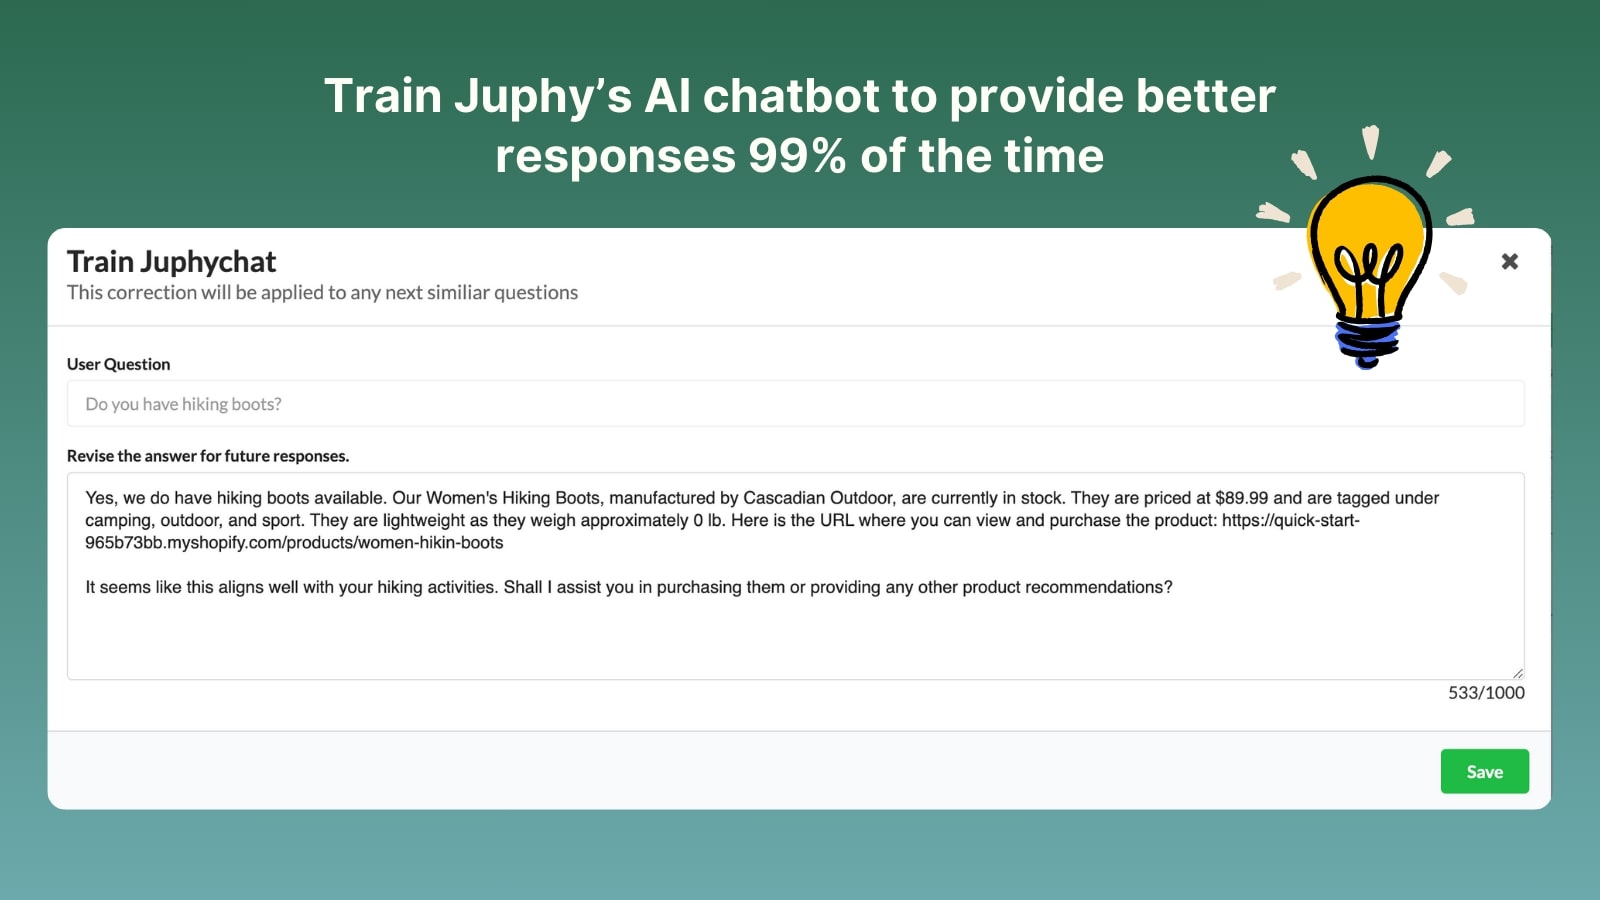 Juphy's Unified Inbox lets you customize your AI shopping assistant's responses.